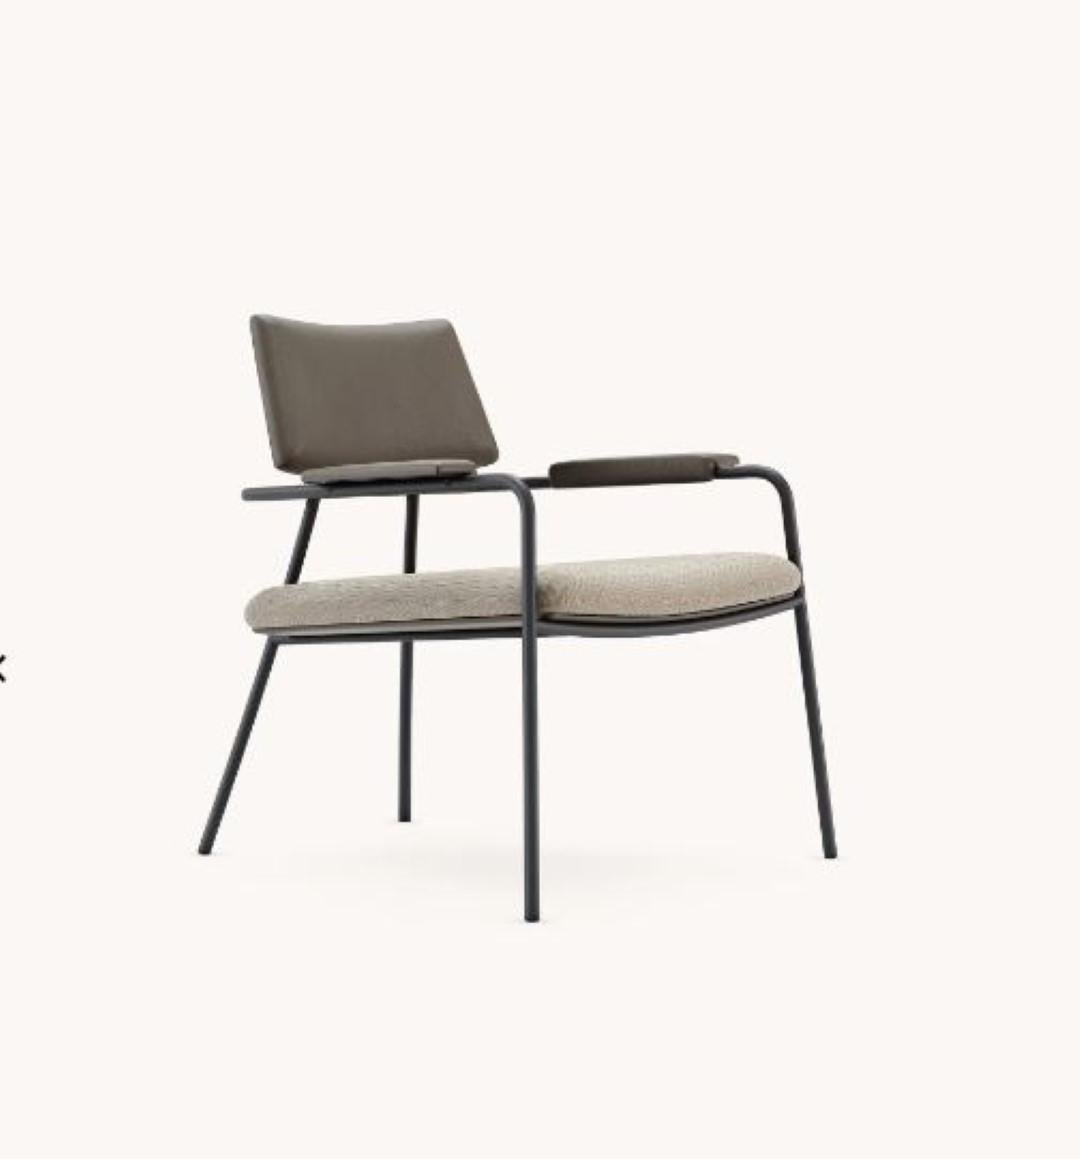 Stranger counter chair by Domkapa
Materials: fiber, black texturized steel. 
Dimensions: W 62 x D 65 x H 105 cm. 
Also available in different materials. 

The robust metal structure of Stranger bar and counter chairs gives this design powerful